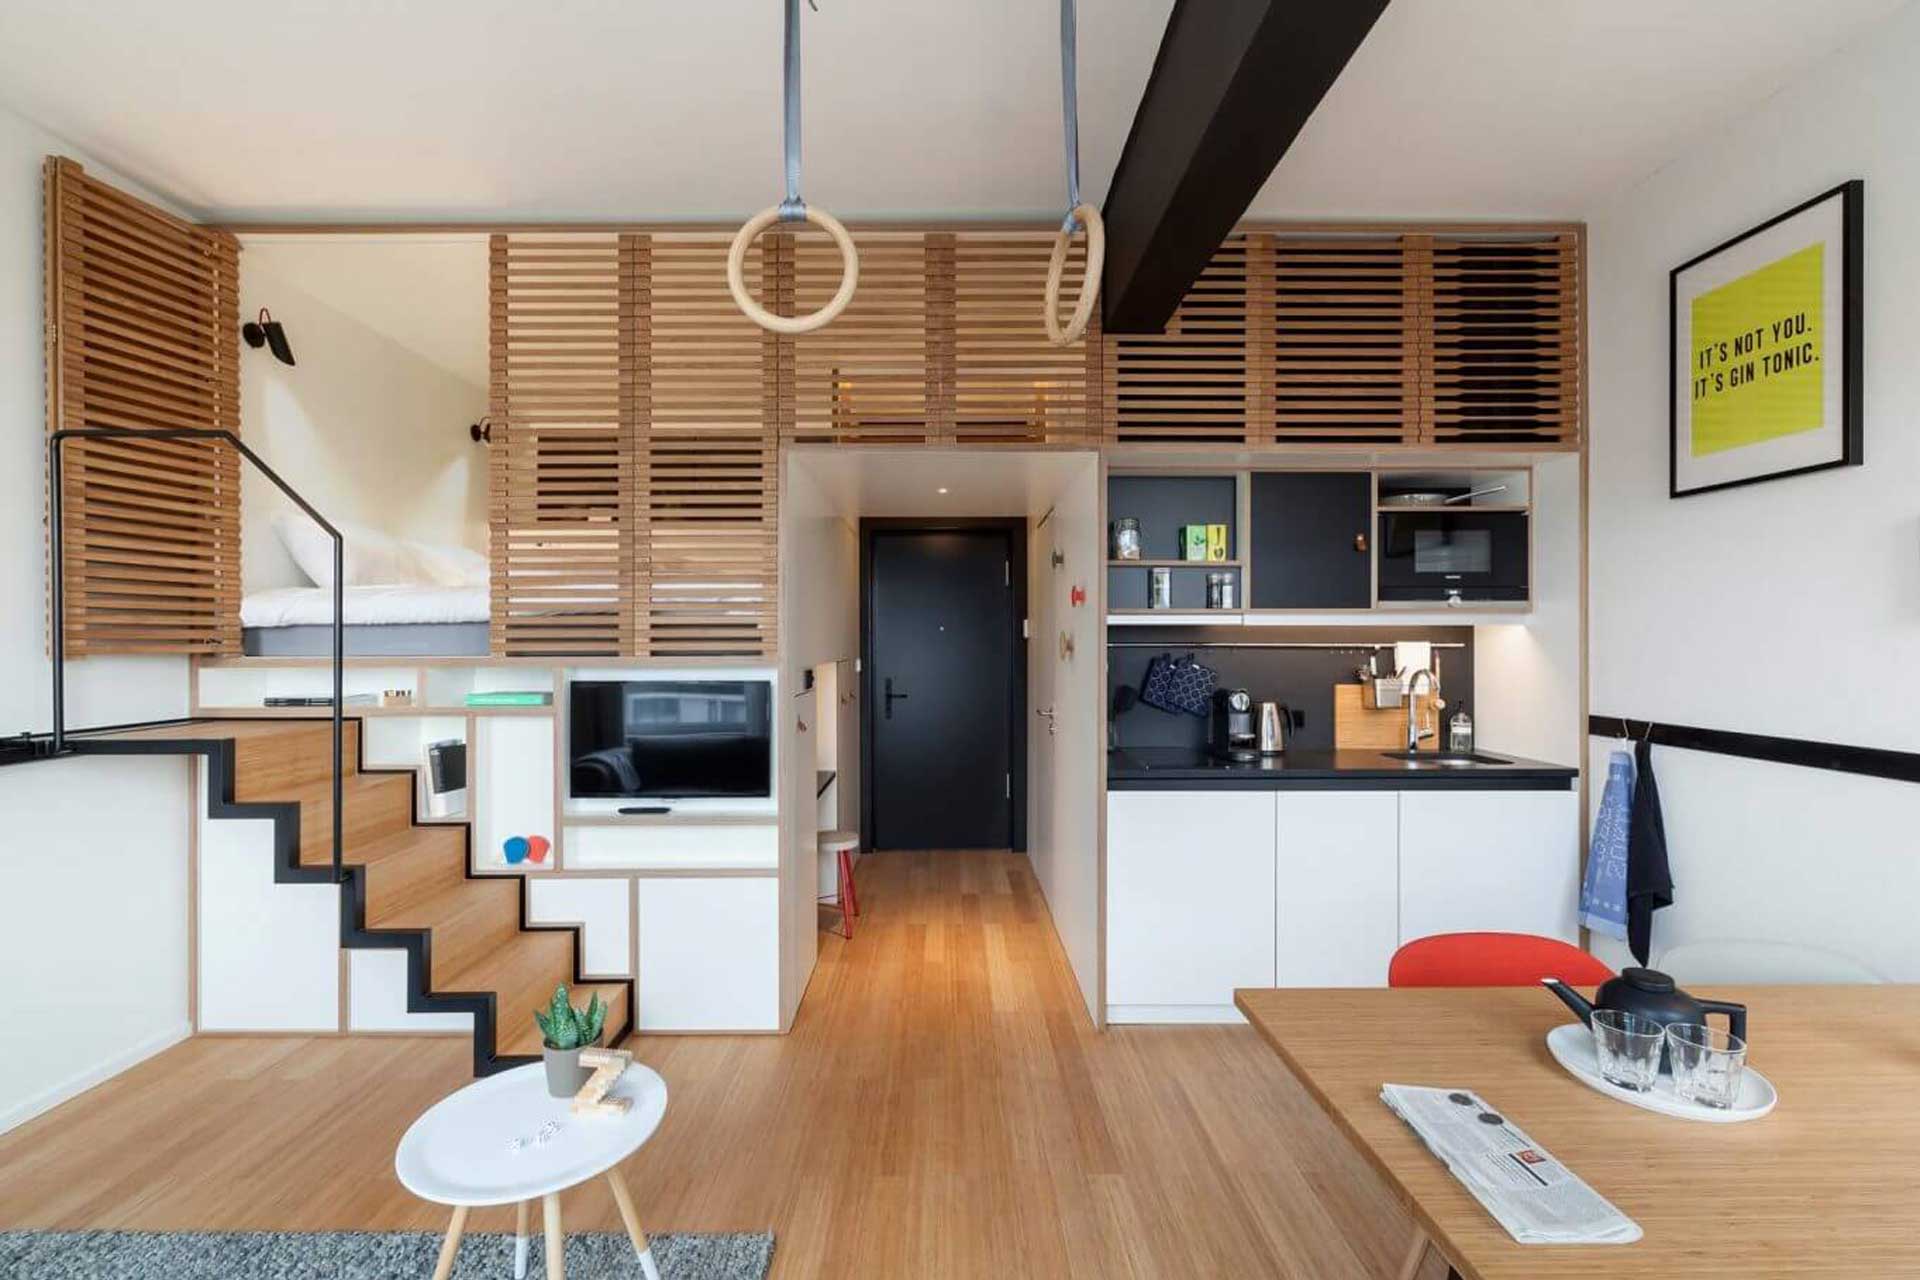 Zoku Amsterdam won the prize in 2015, and opened its doors in 2016